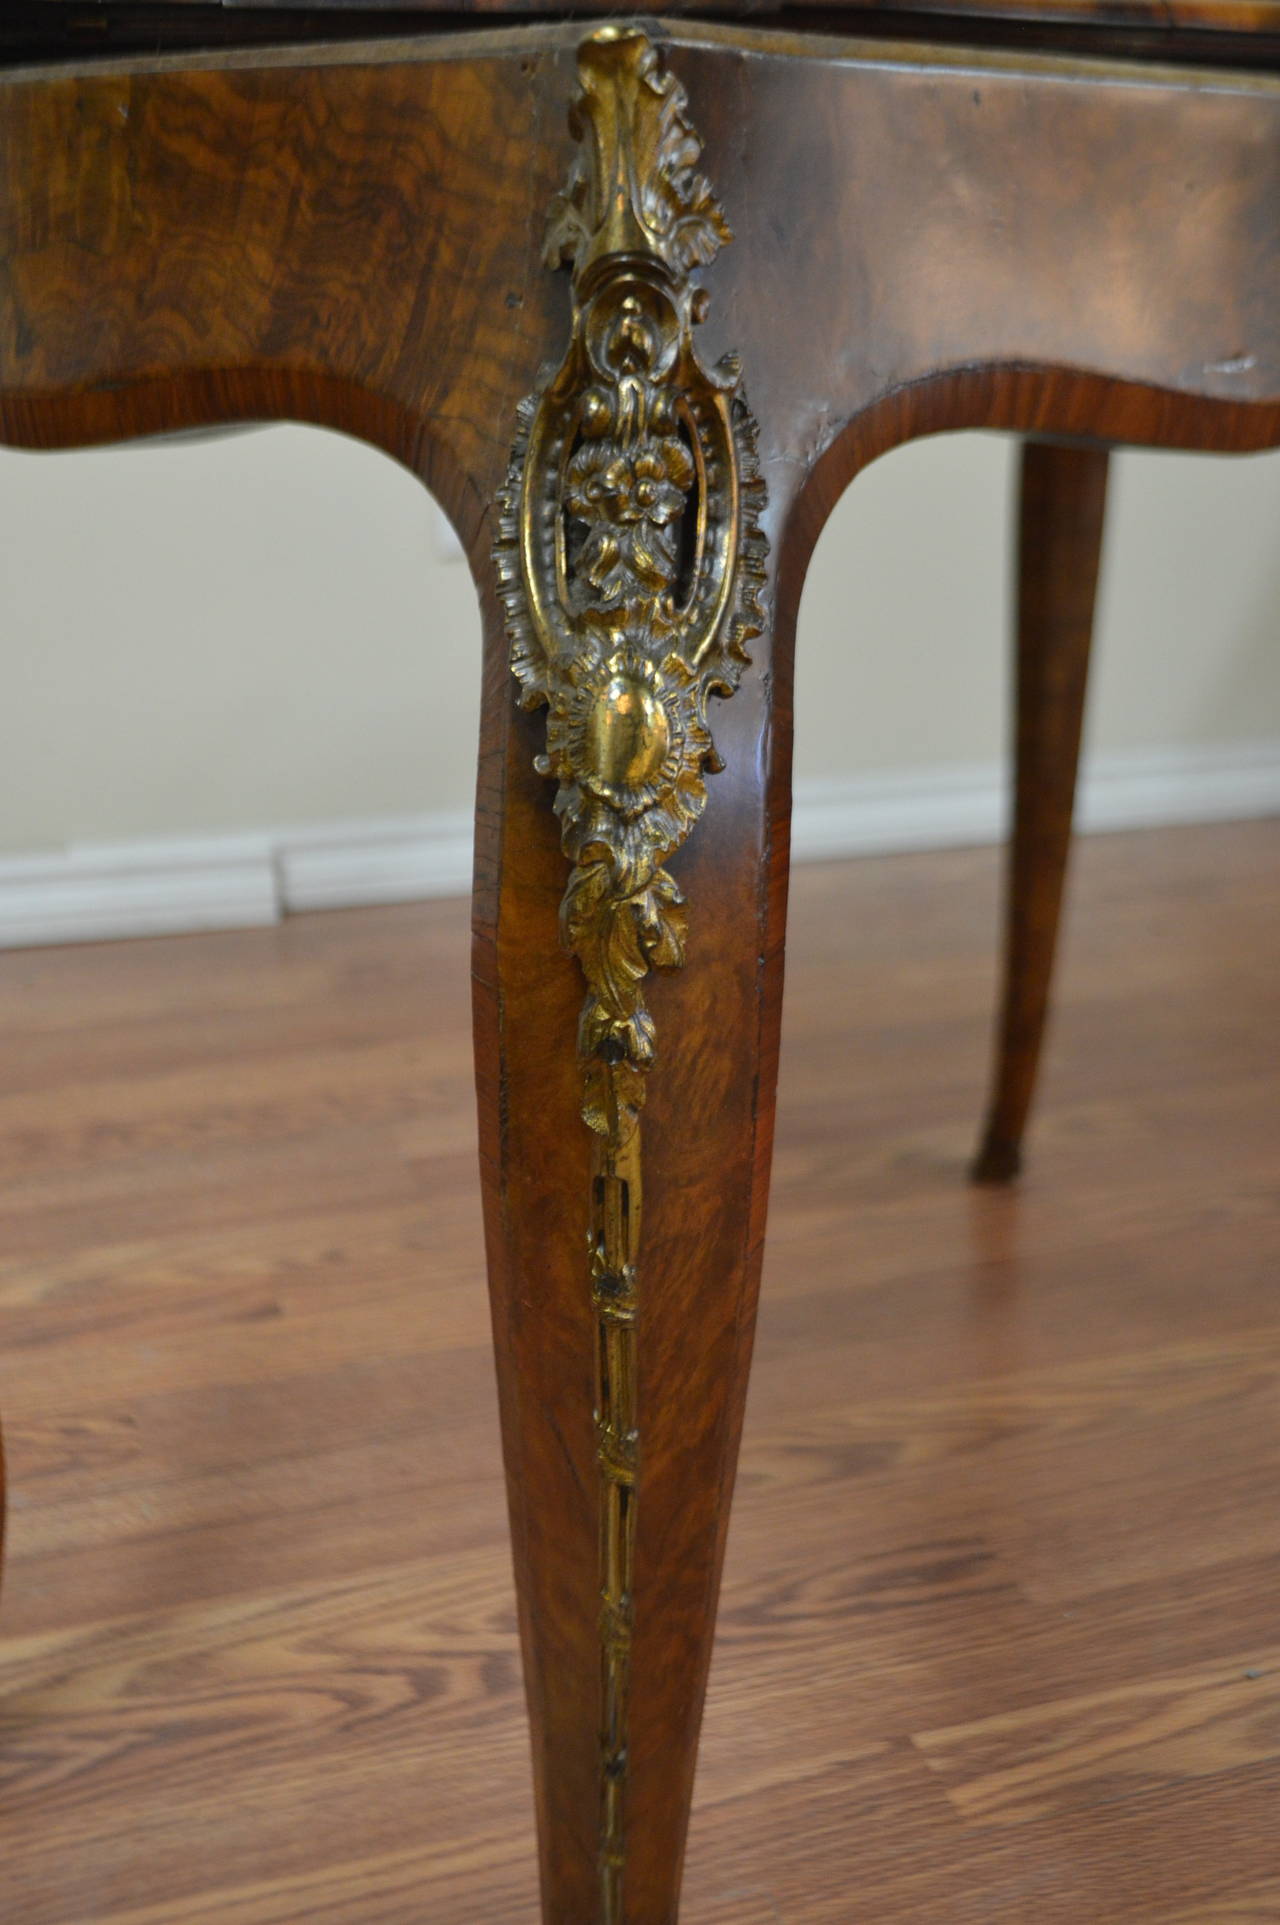 A fine quality burled mahogany games table with bronze details on all legs. The table makes a fine console while not being used as a games table.
The table top pivots to one side and opens to a good size table. The felt is in good condition and has